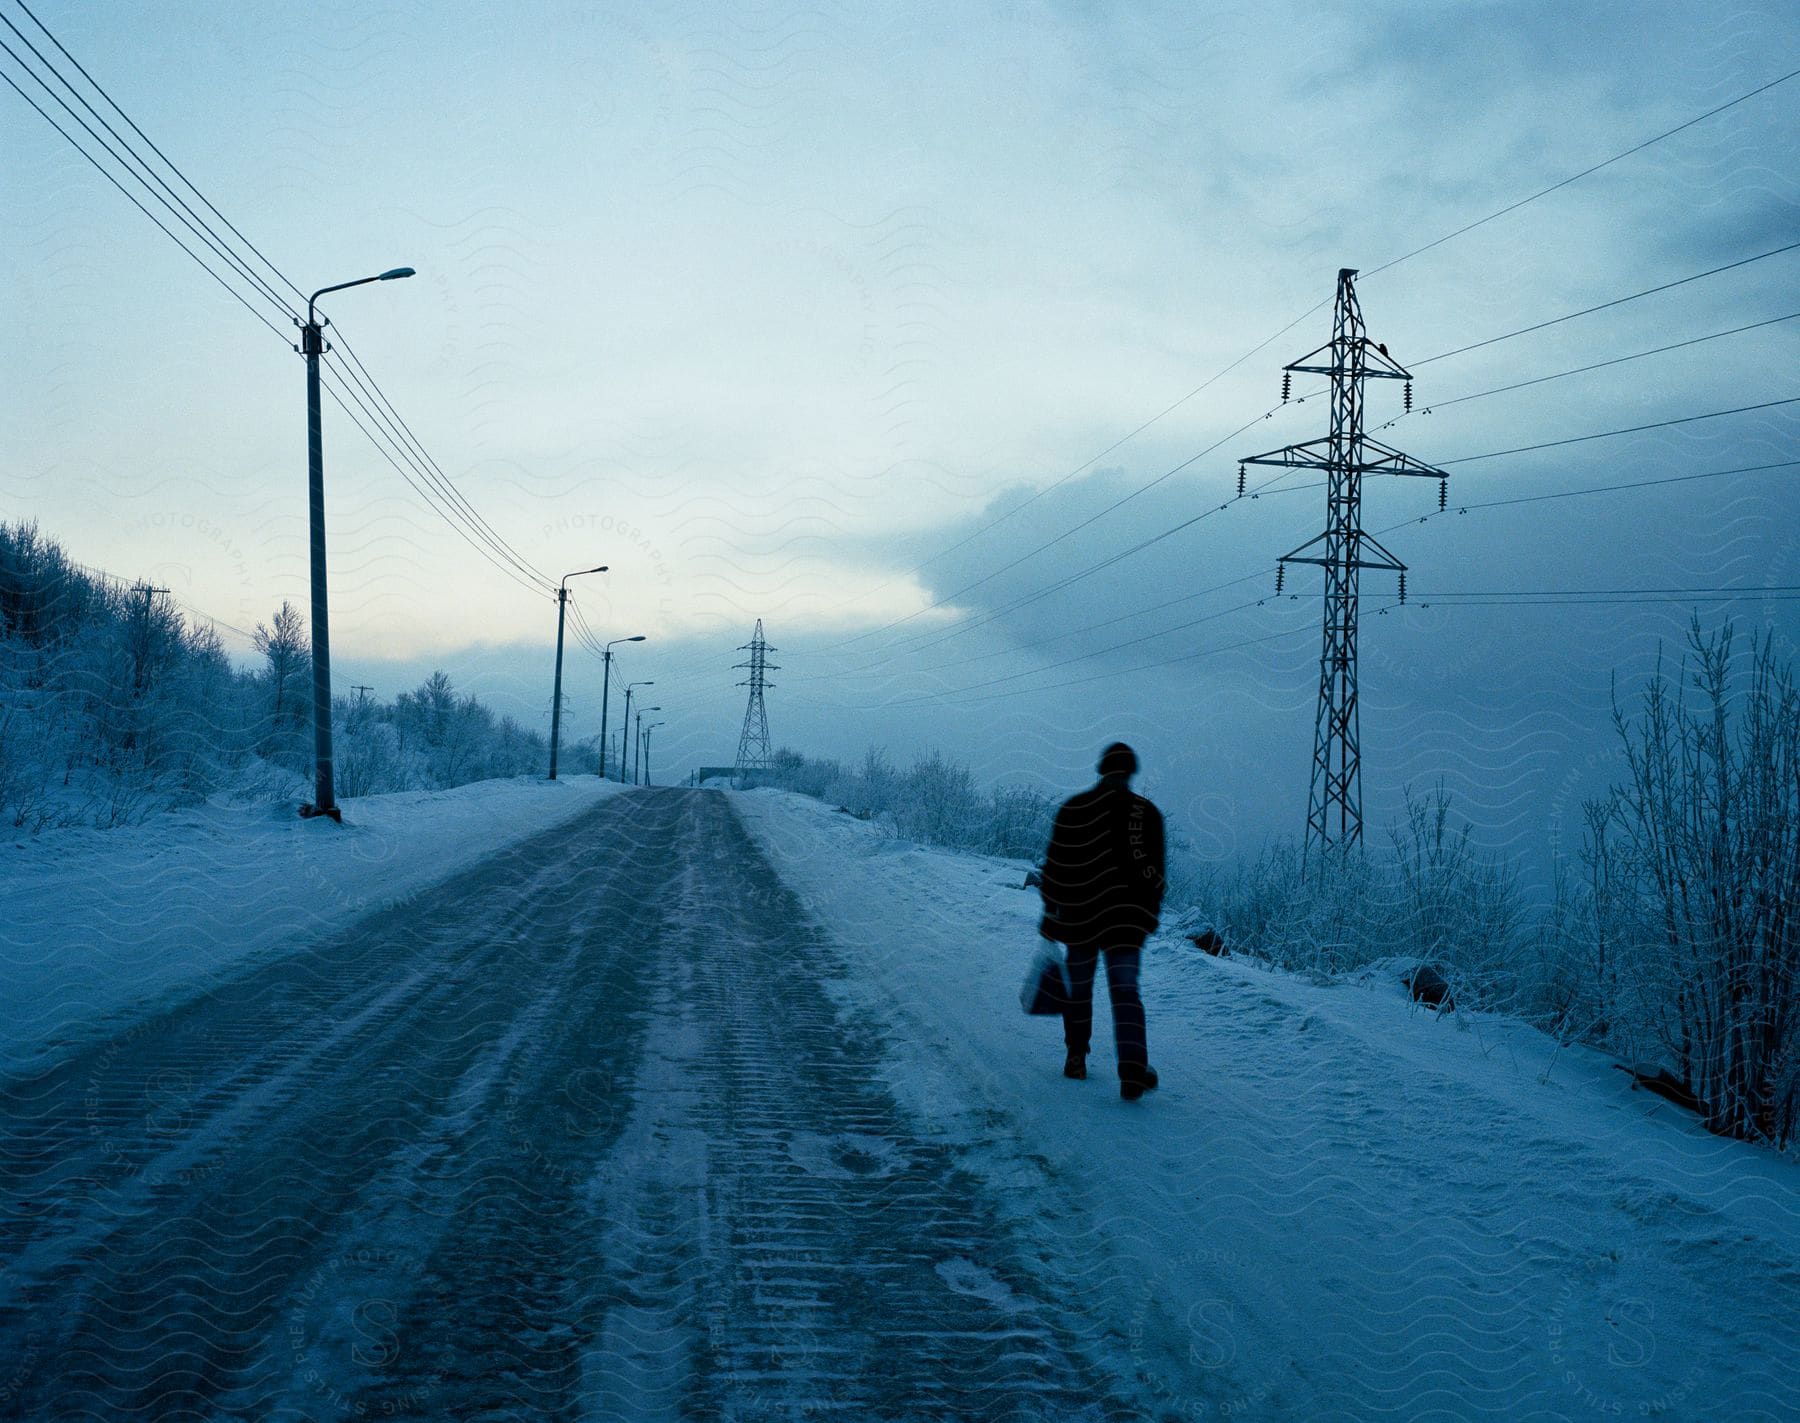 A man wearing a black hat coat and pants is walking down a snowy road